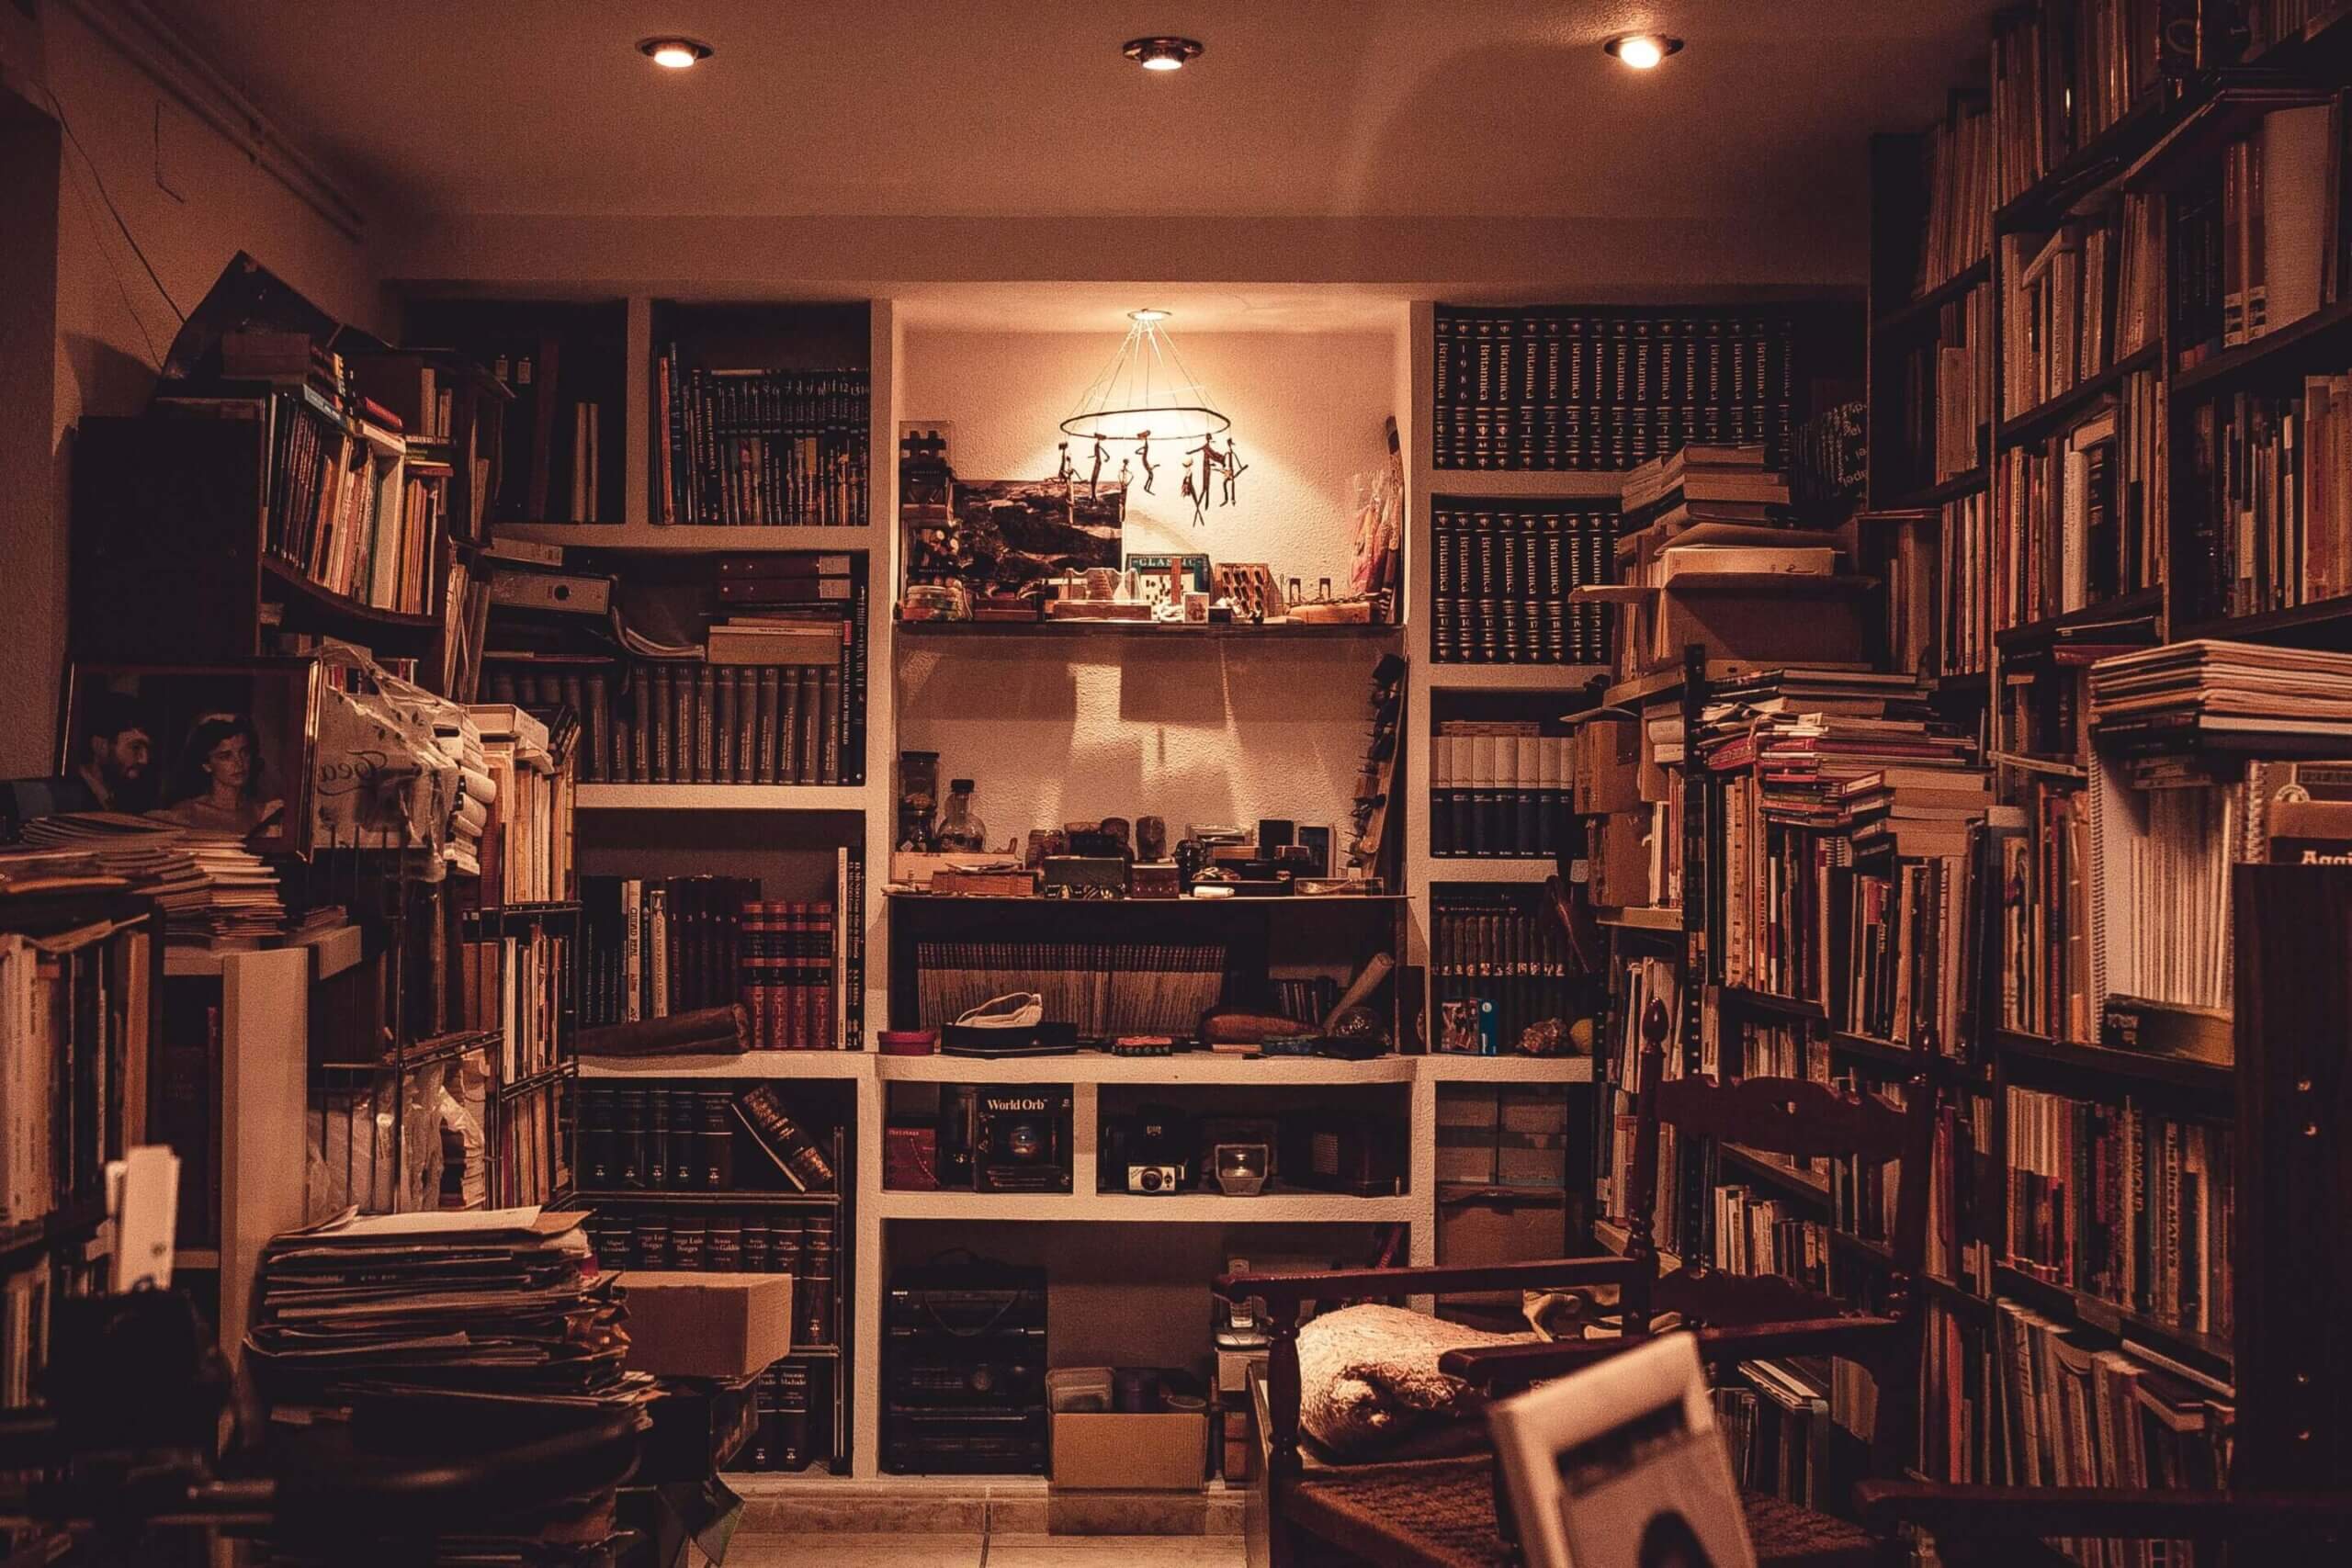 Room crowded with books and knick-knacks